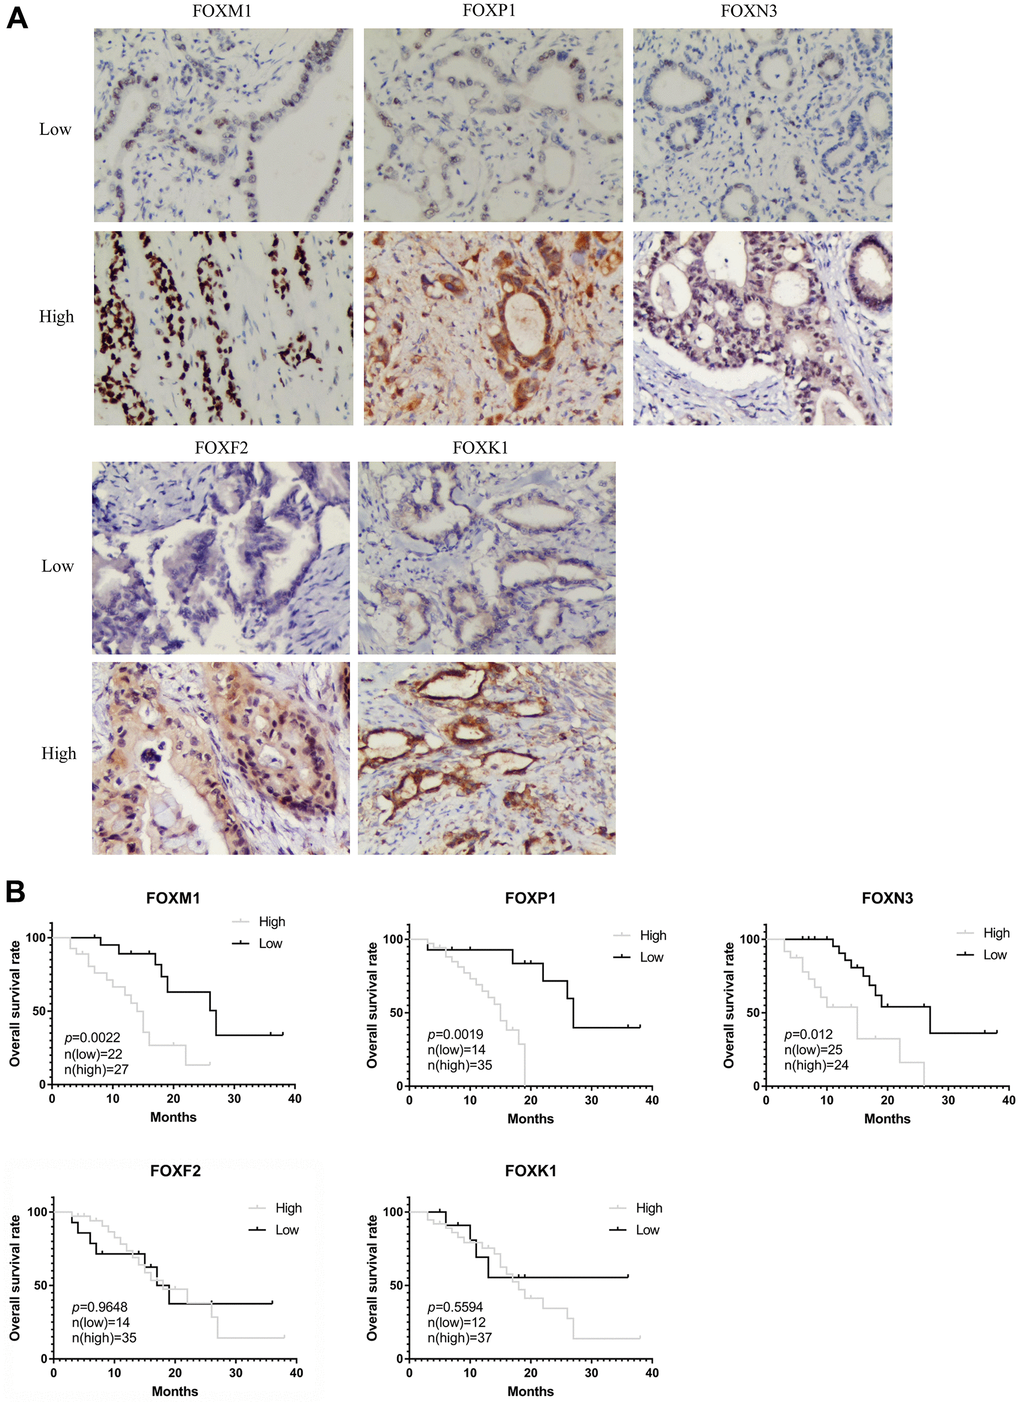 Validation of the prognostic role of FOXs in PAAD patient tissues. (A) Representative immunohistochemistry (IHC) images (200X) in PAAD tissues with low or high FOXM1, FOXP1, FOXN3, FOXF2, and FOXK1 protein levels. (B) Expression of FOXM1, FOXP1, and FOXN3 was negatively correlated with OS in PAAD patient pathology samples. Expression of FOXF2 and FOXK1 had no significant correlation with OS.